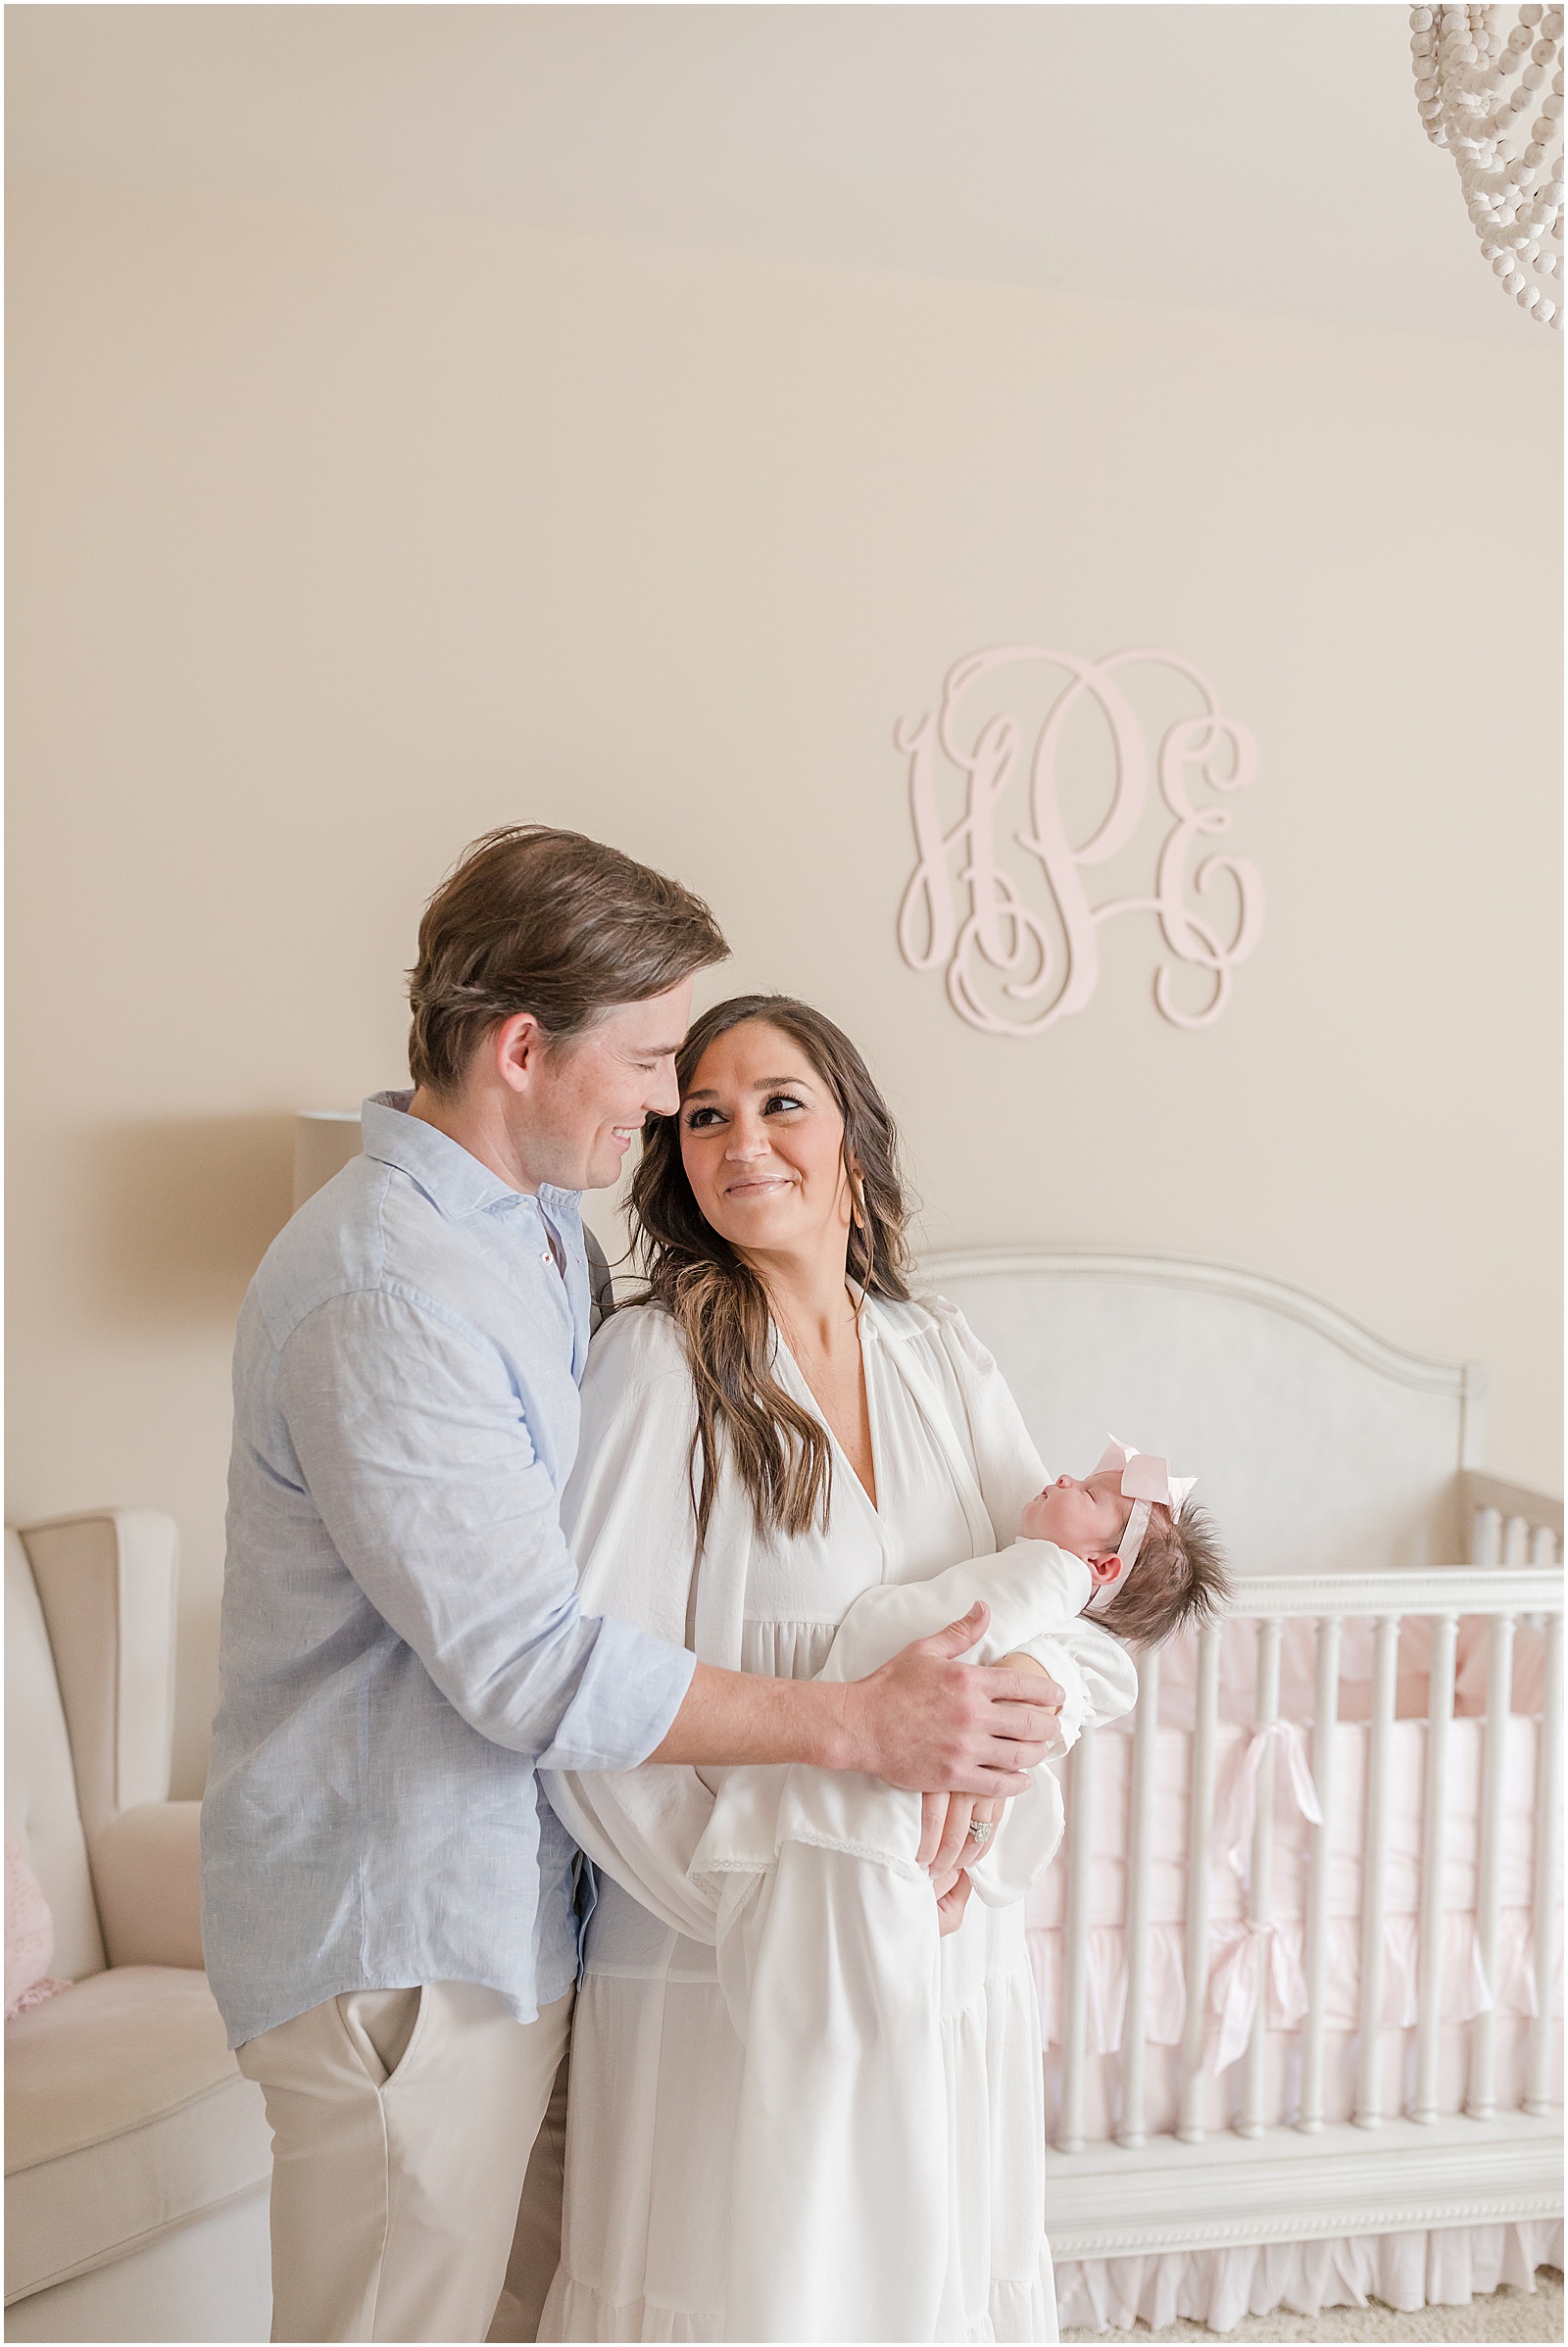 Portrait of parents holding newborn baby standing in front of a white crib by Greenville photographer Molly Hensley